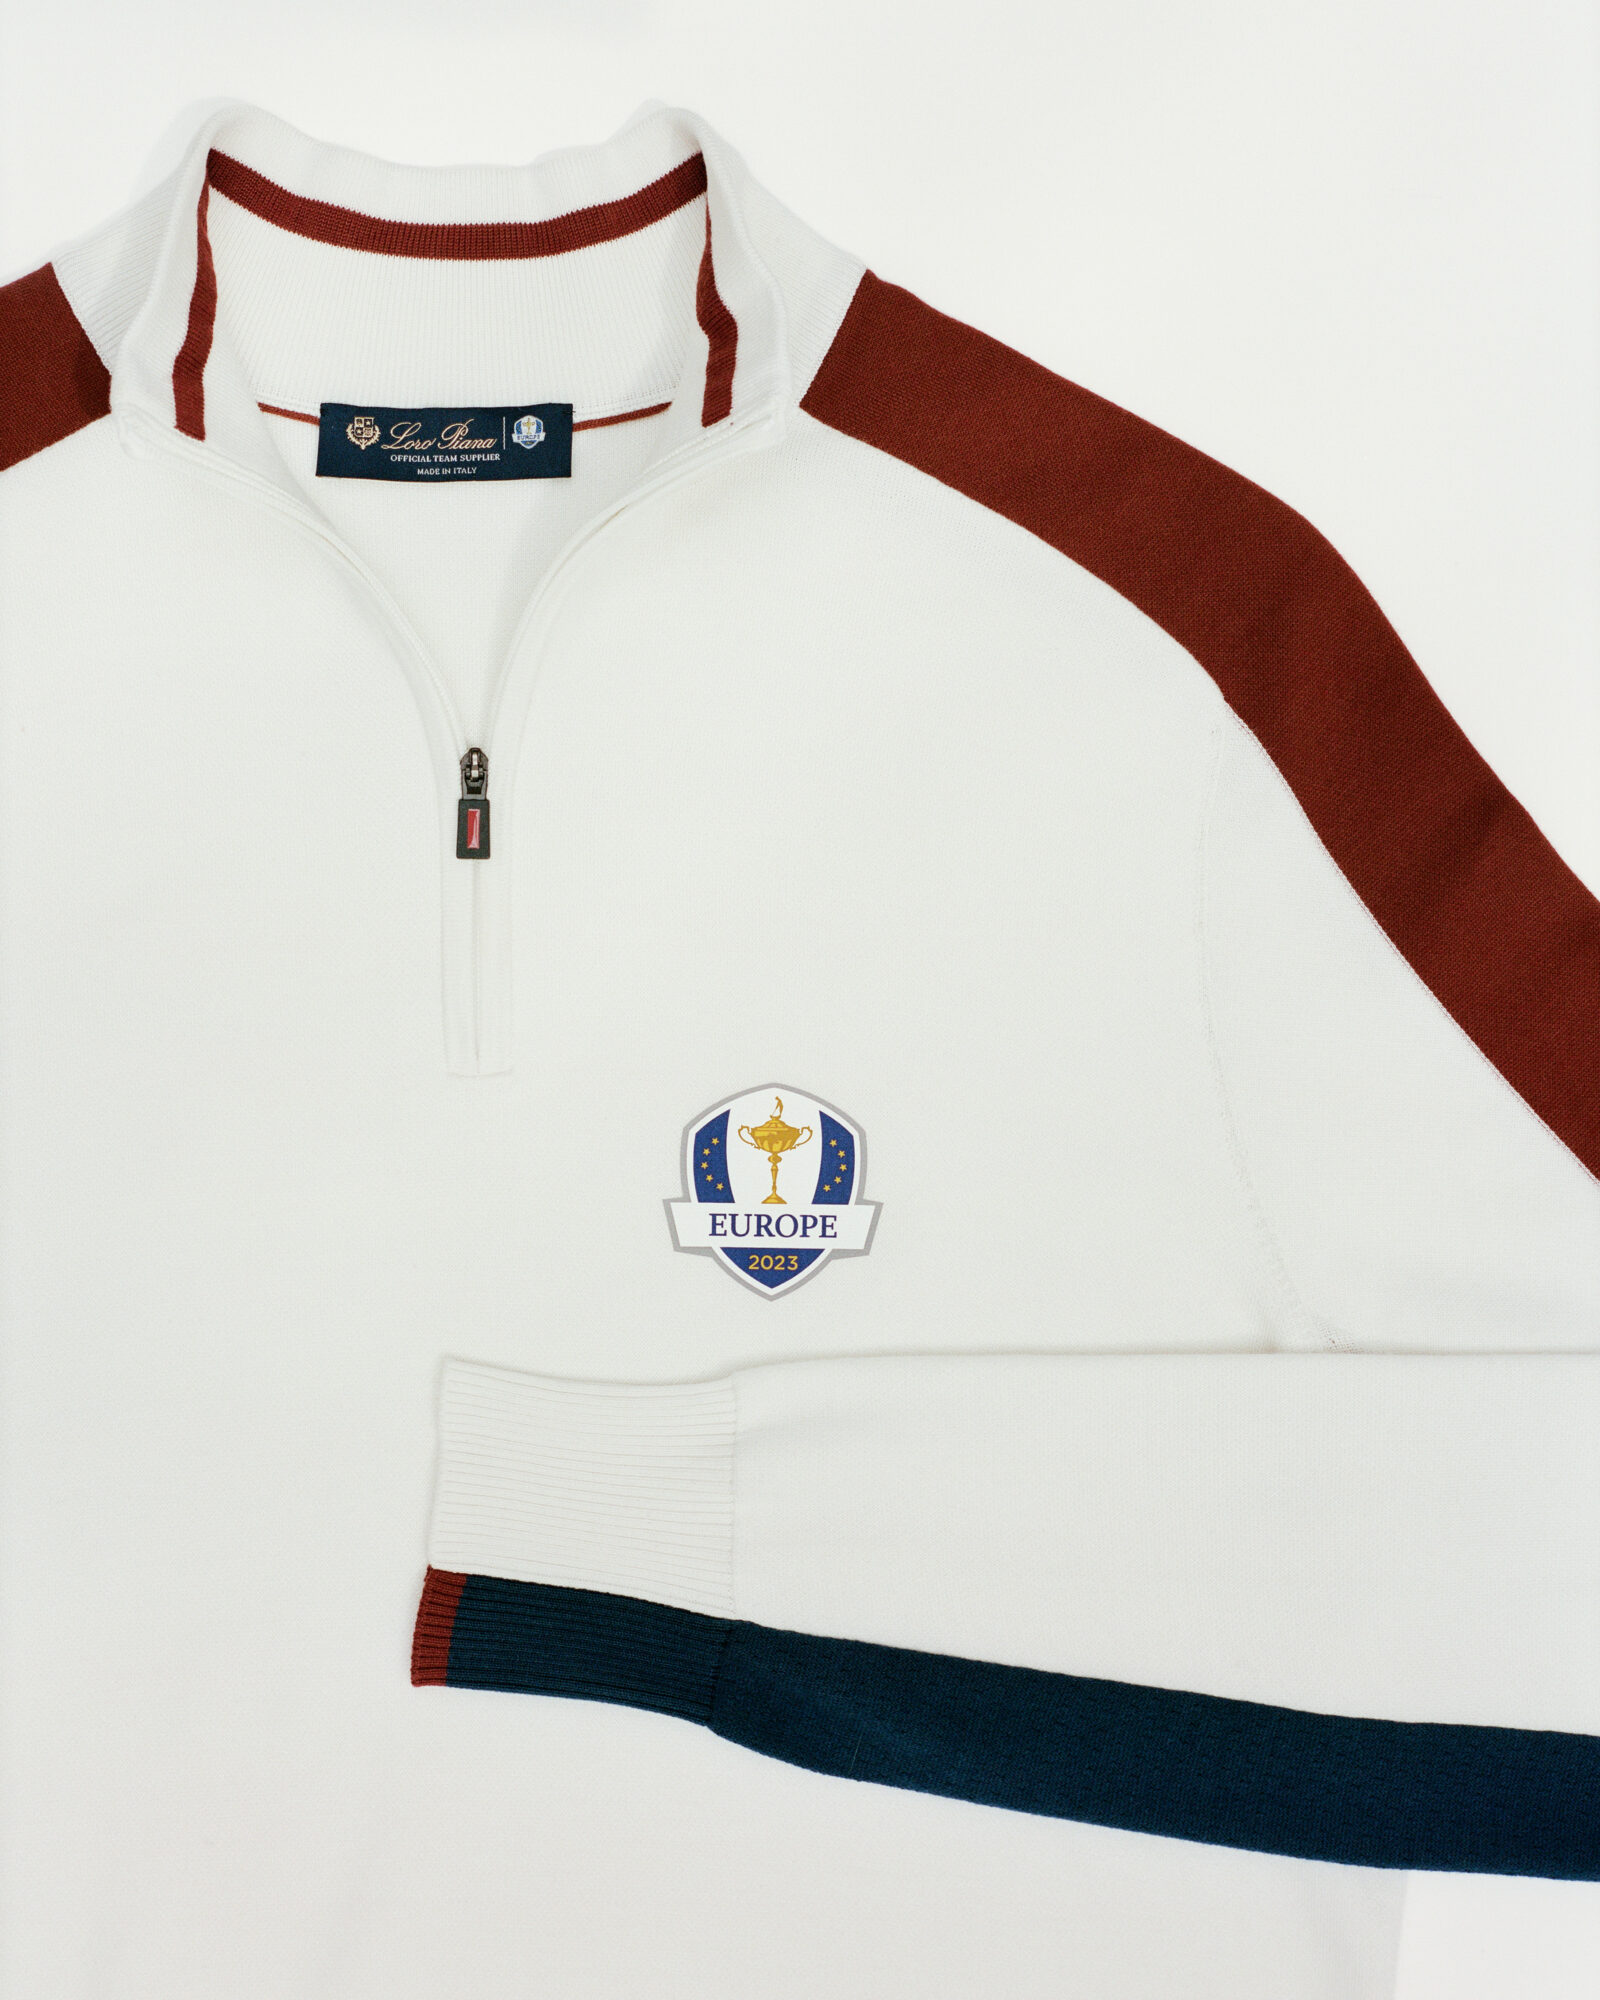 Loro Piana at the 2023 Ryder Cup: Elegance on the Greens